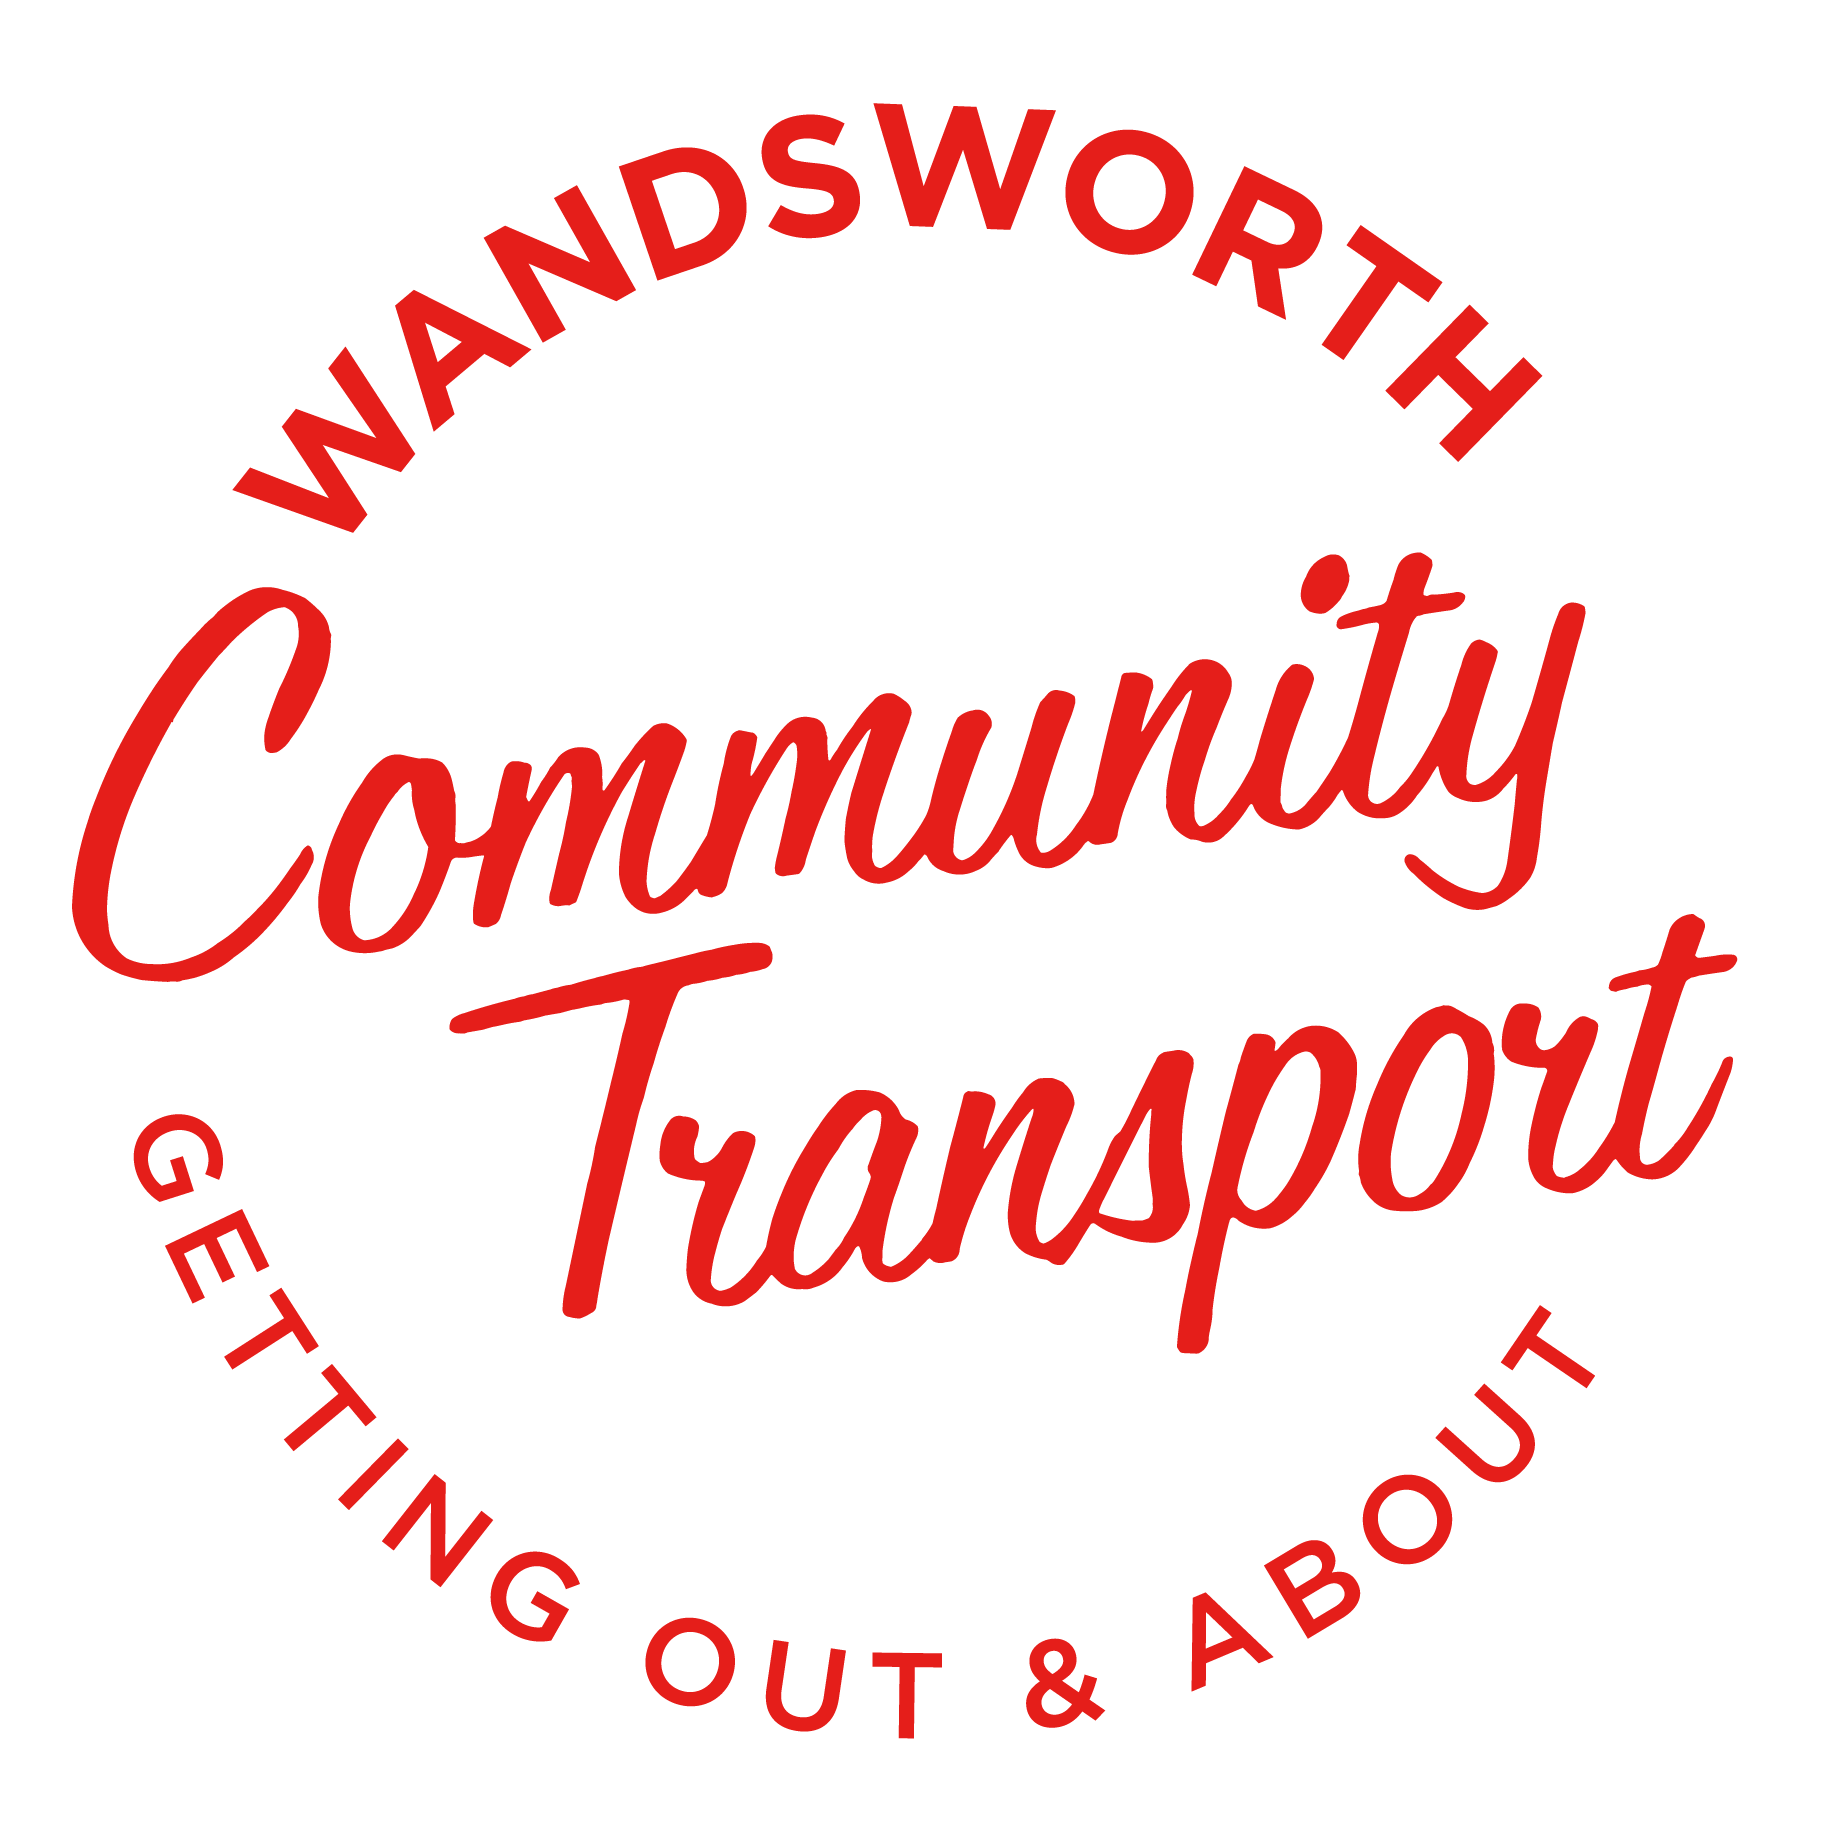 Wandsworth Community Transport - Getting out and about